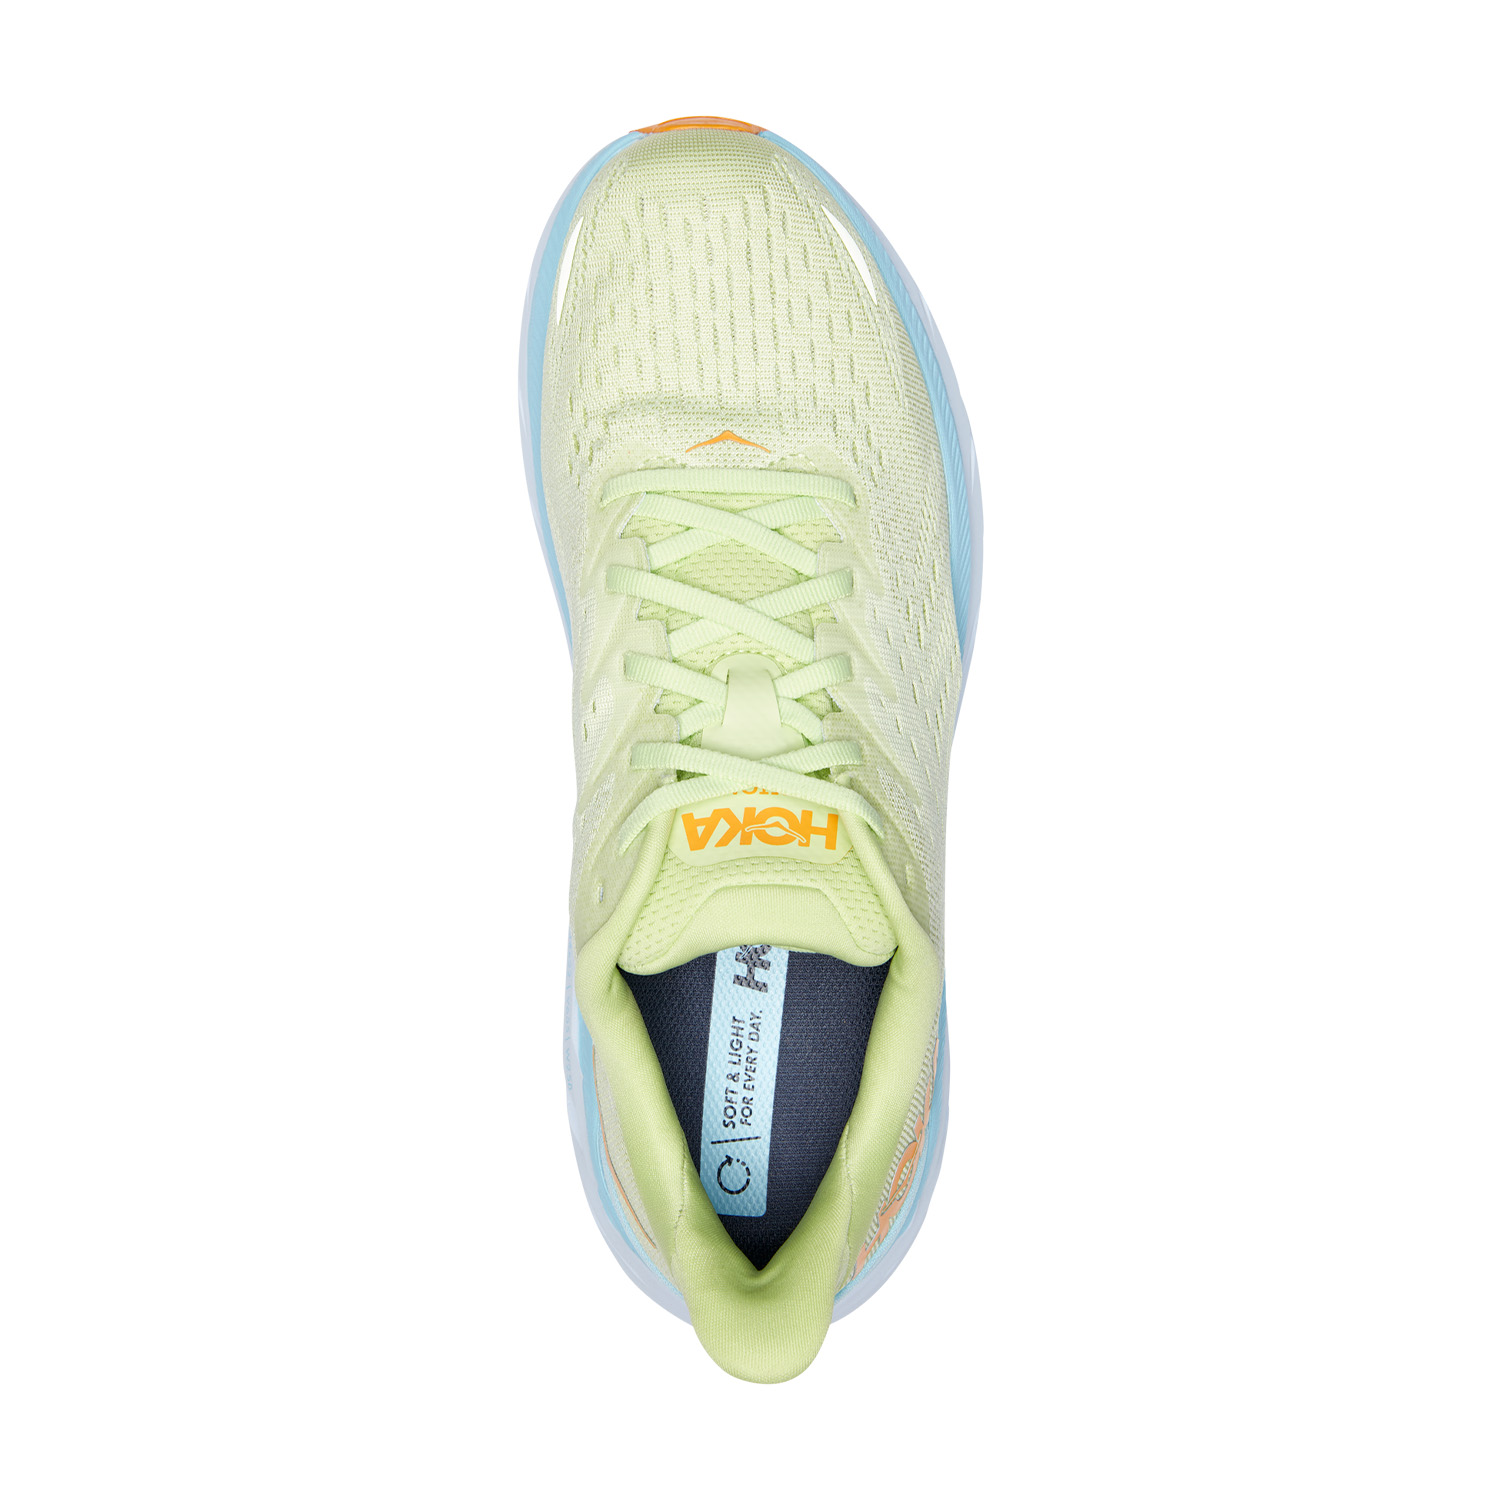 Hoka One One Clifton 8 - Butterfly/Summer Song